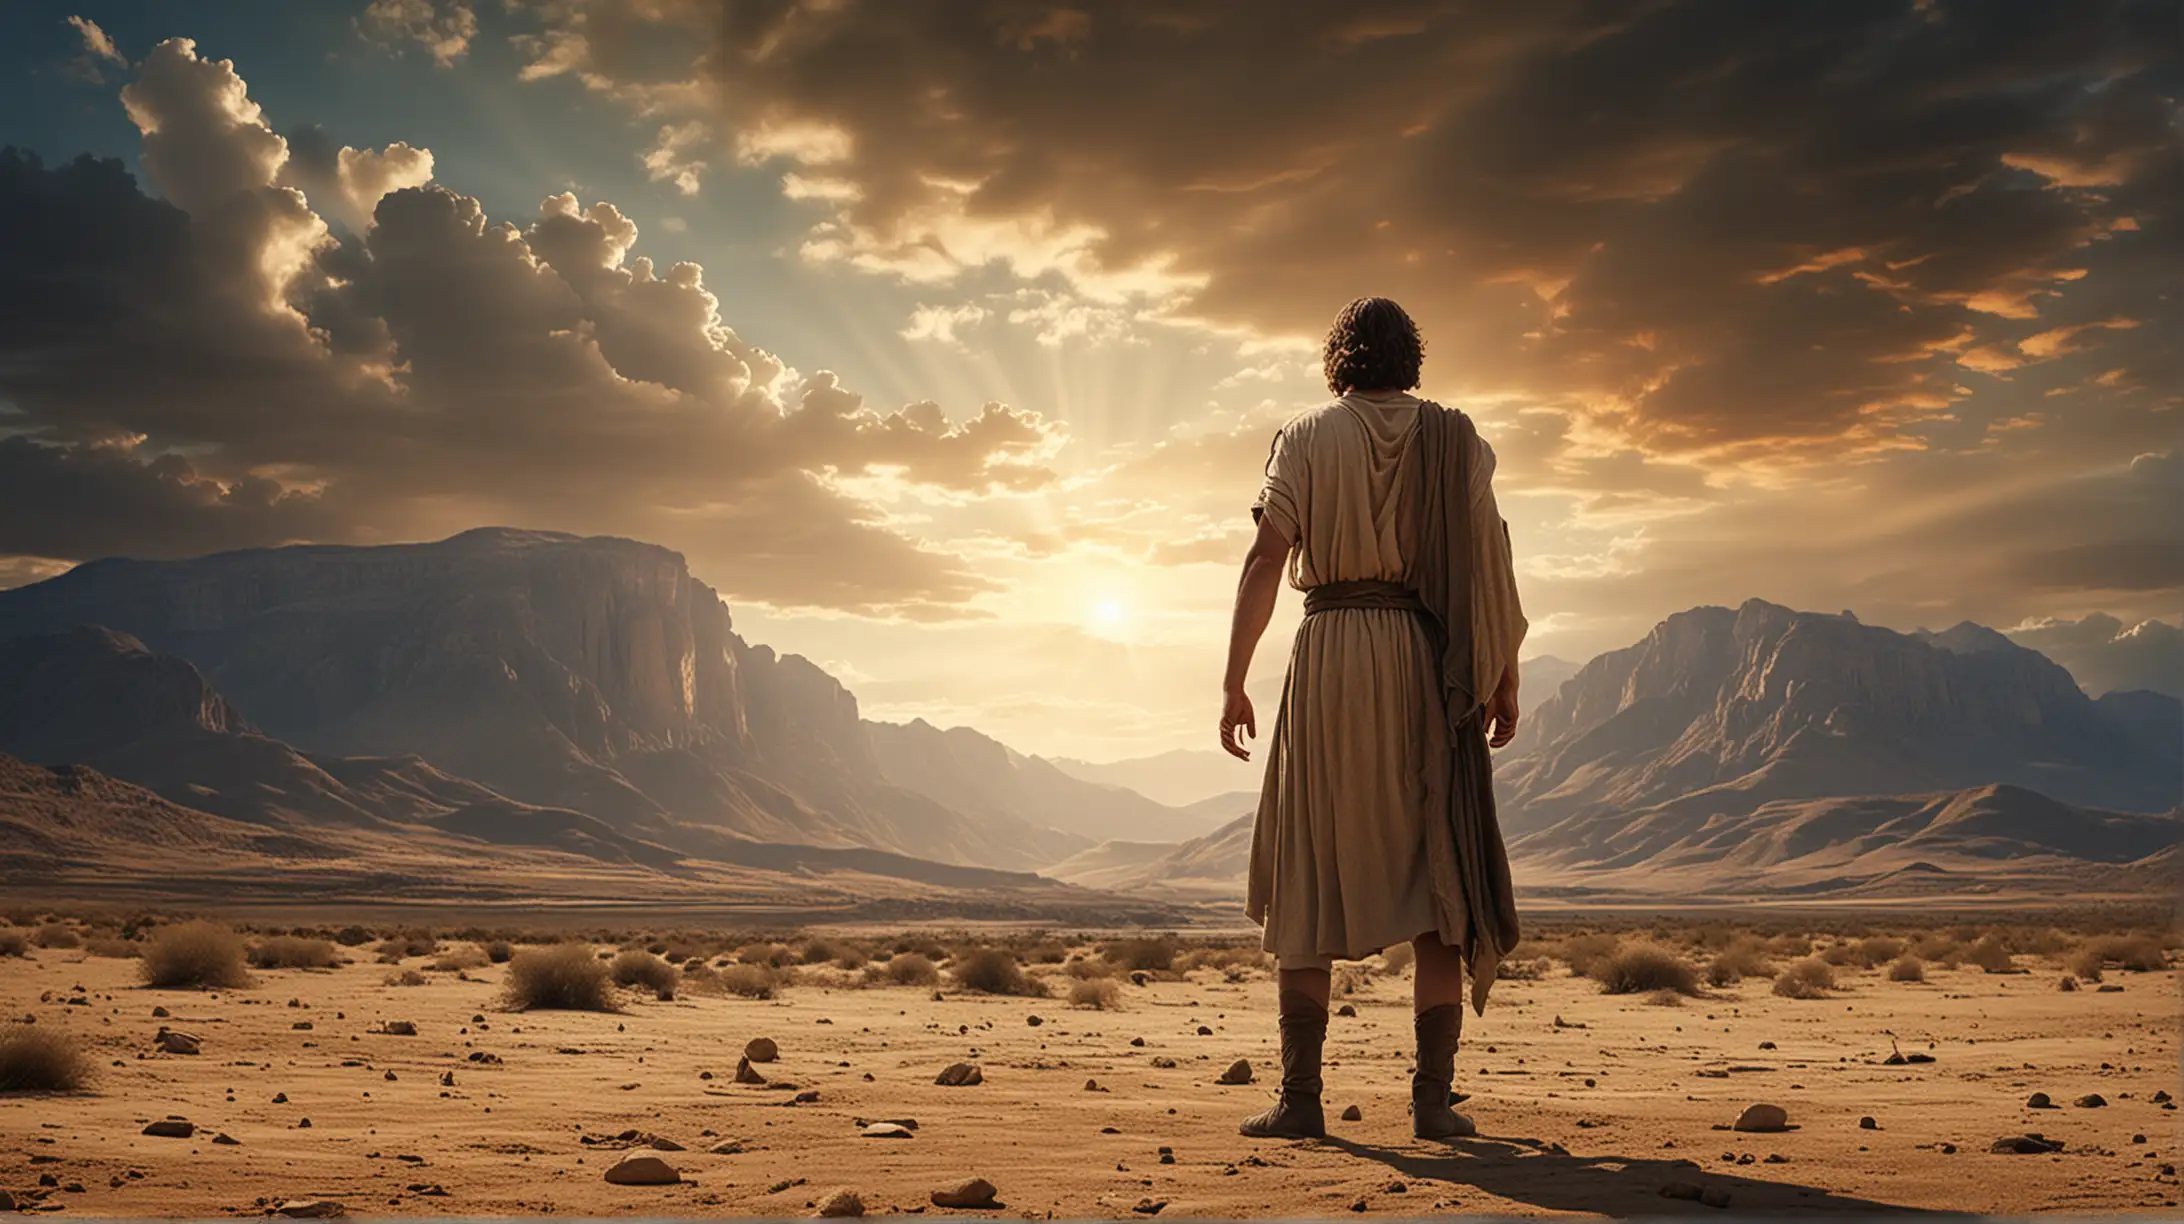 an actual Giant as mentioned in the Bible, in a desert field facing a young man.  Mountains and a magnificent sky. Set during the Biblcal era of Joshua.